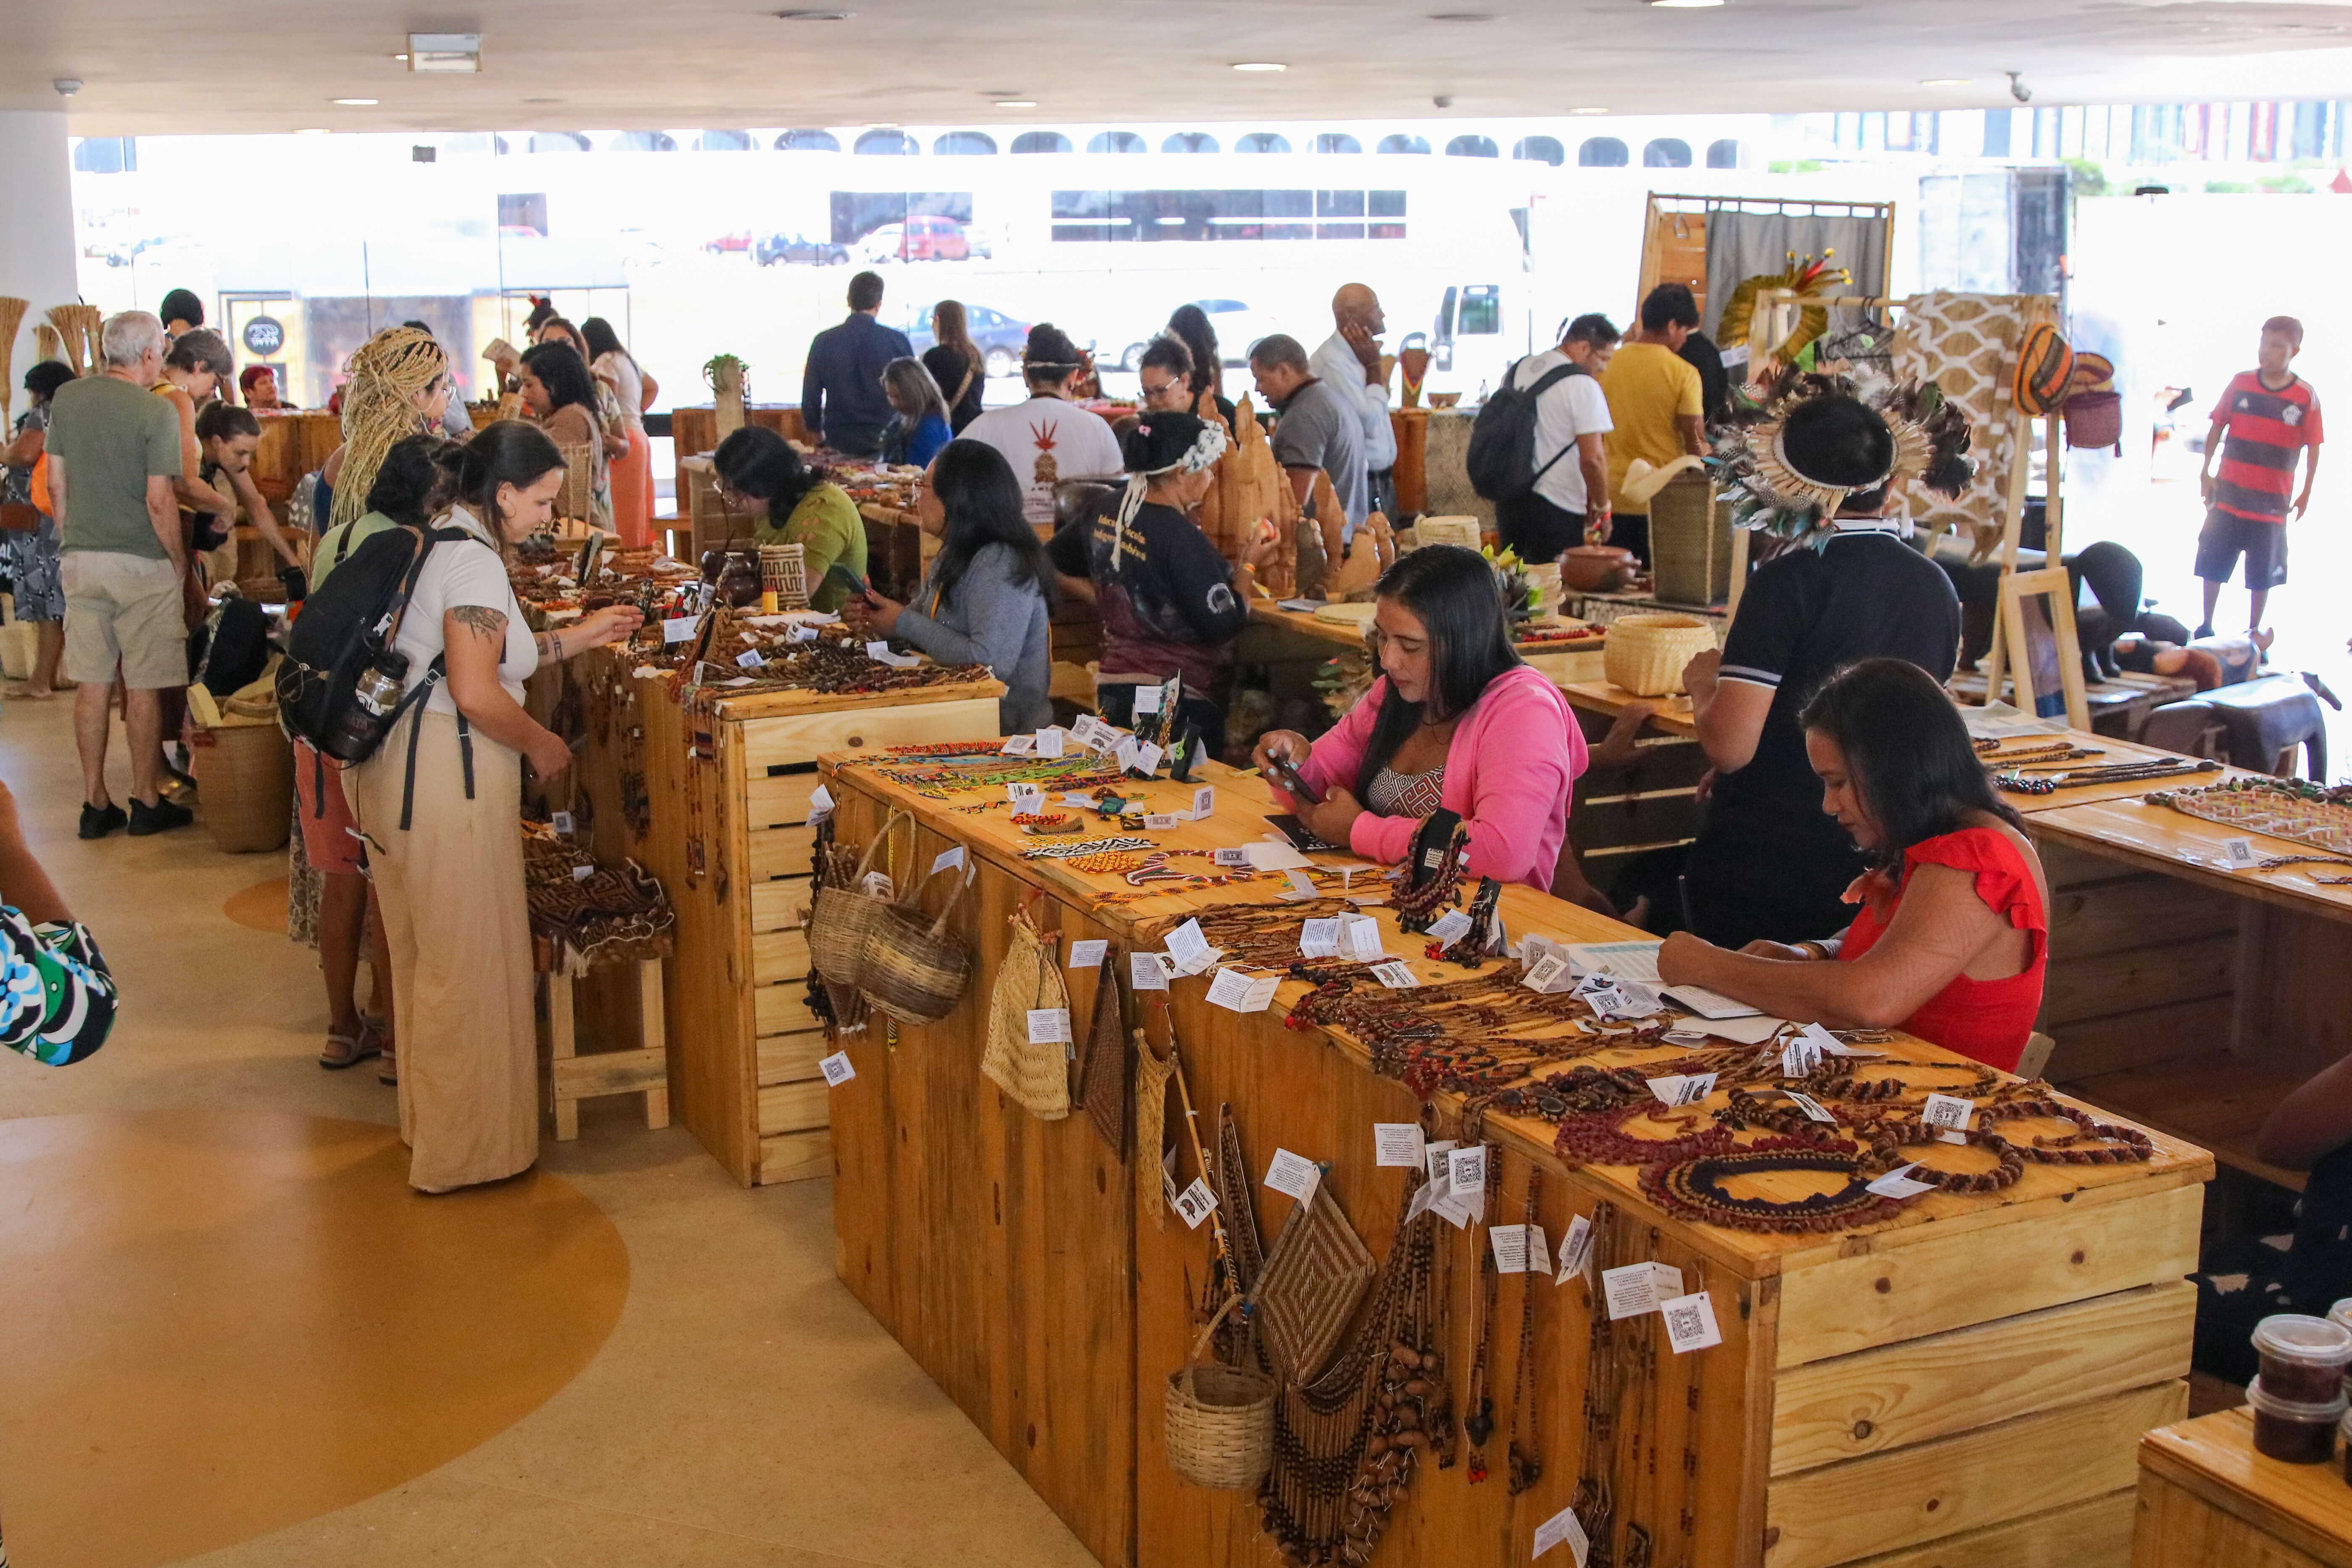 In December, Brasília hosted the largest indigenous fair ever organized in the country. The exhibition showed the potential for sustainable production. Photo: Fabio Rodrigues Pozzebom/Agência Brasil